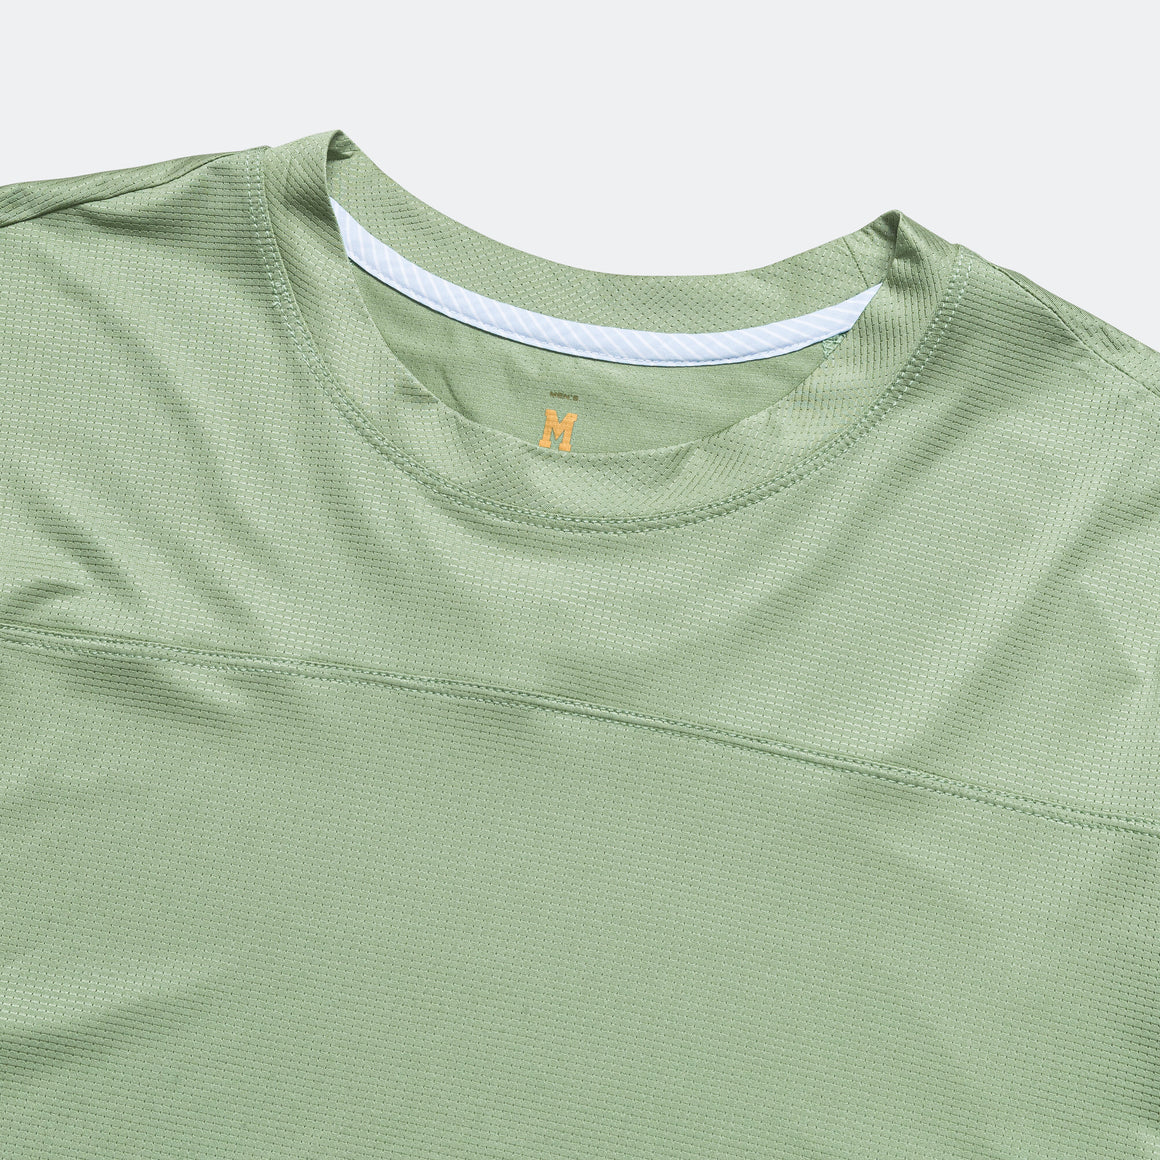 Tracksmith - Mens Twilight Tee - Loden - Up There Athletics